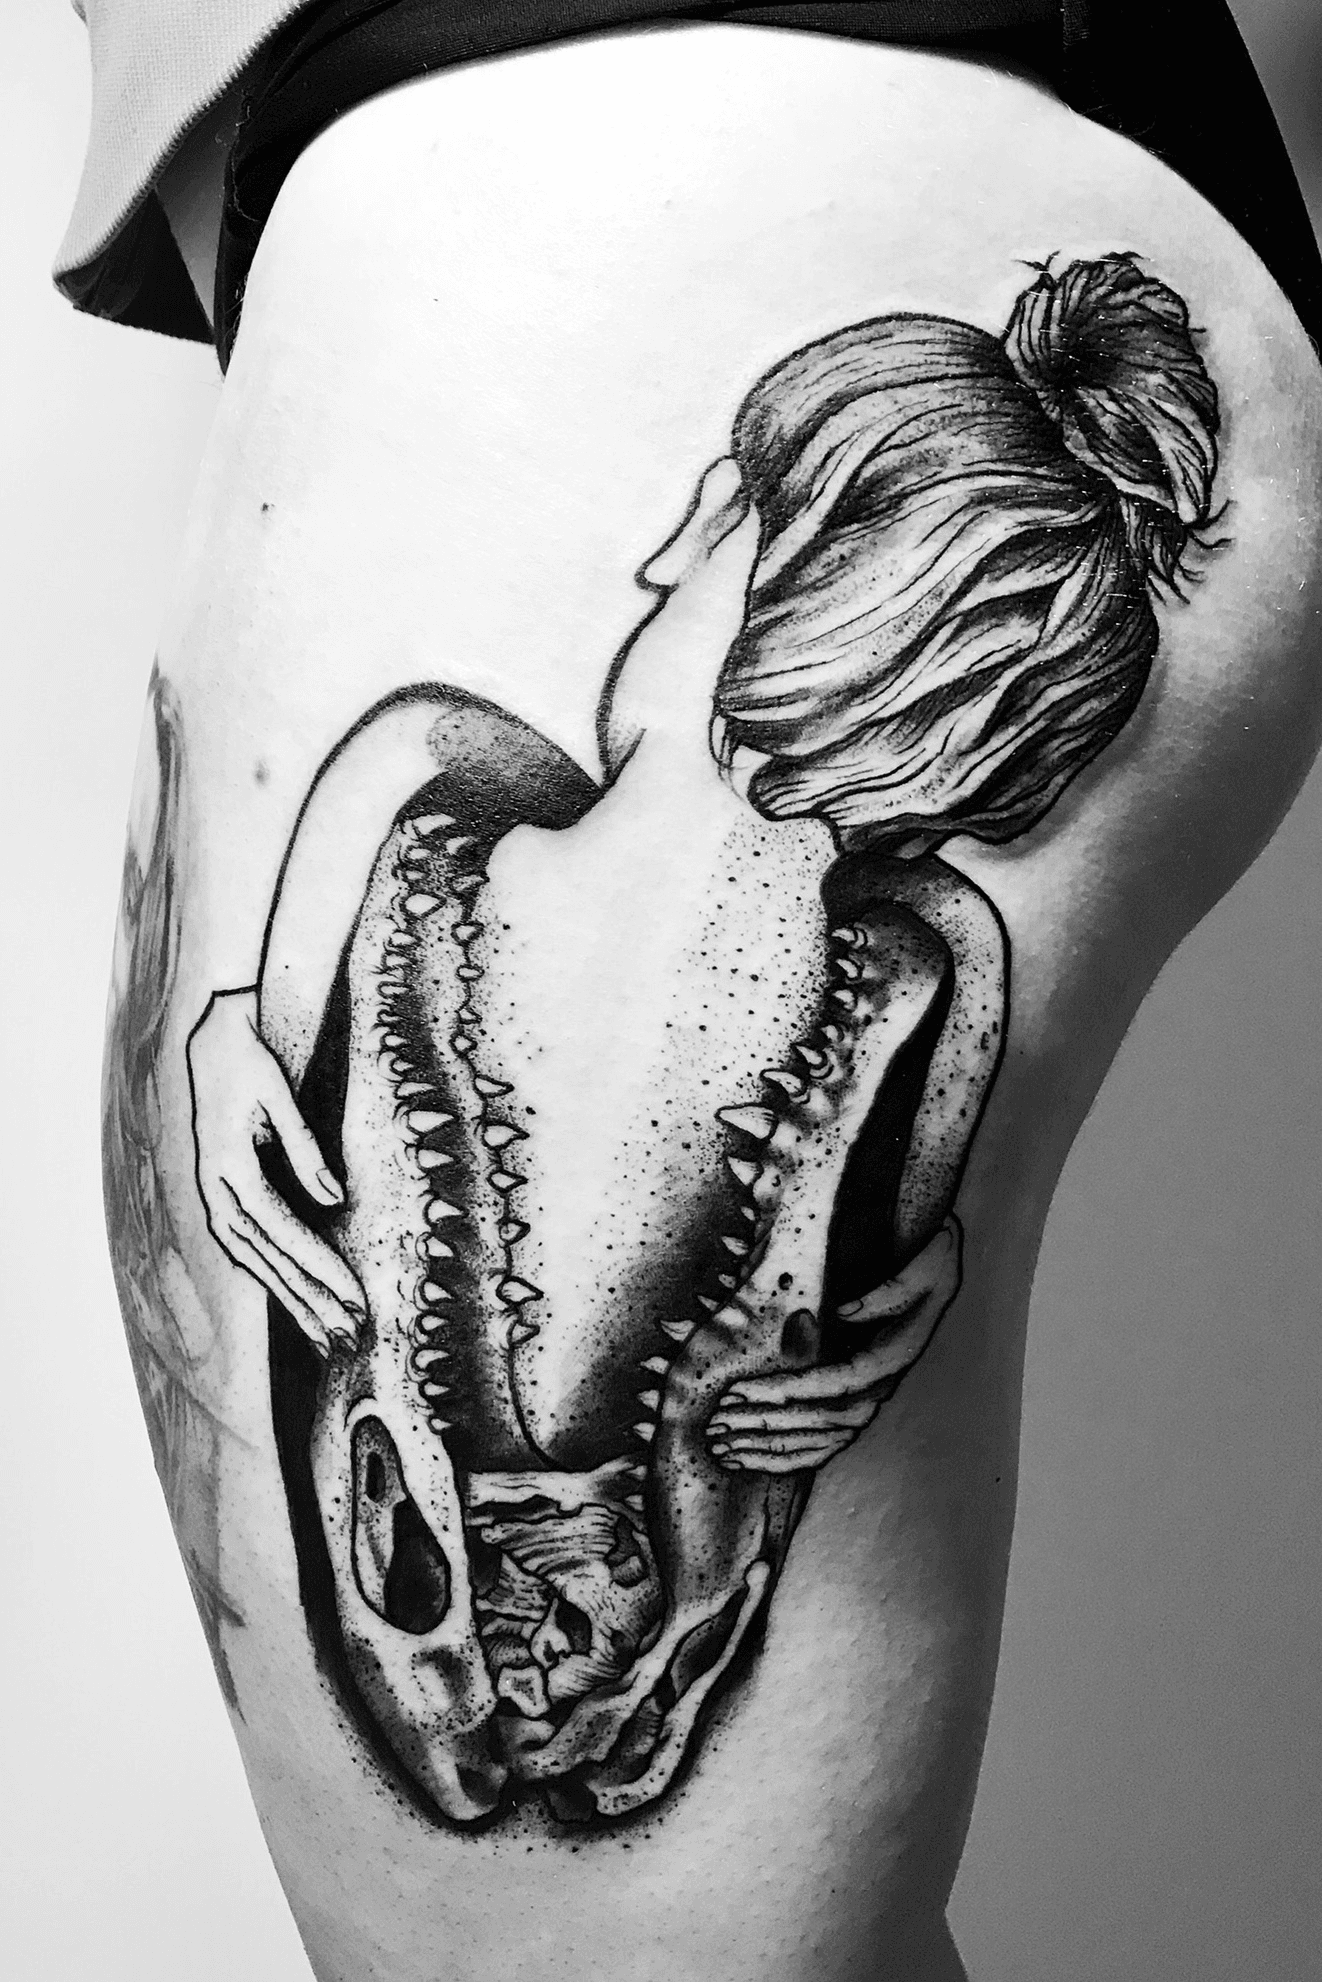 Wesley Canada on Instagram I got to tattoo this alligator skull and some  ferns today Thanks for making the trip Abilene       tattoo  tattoos tattooed